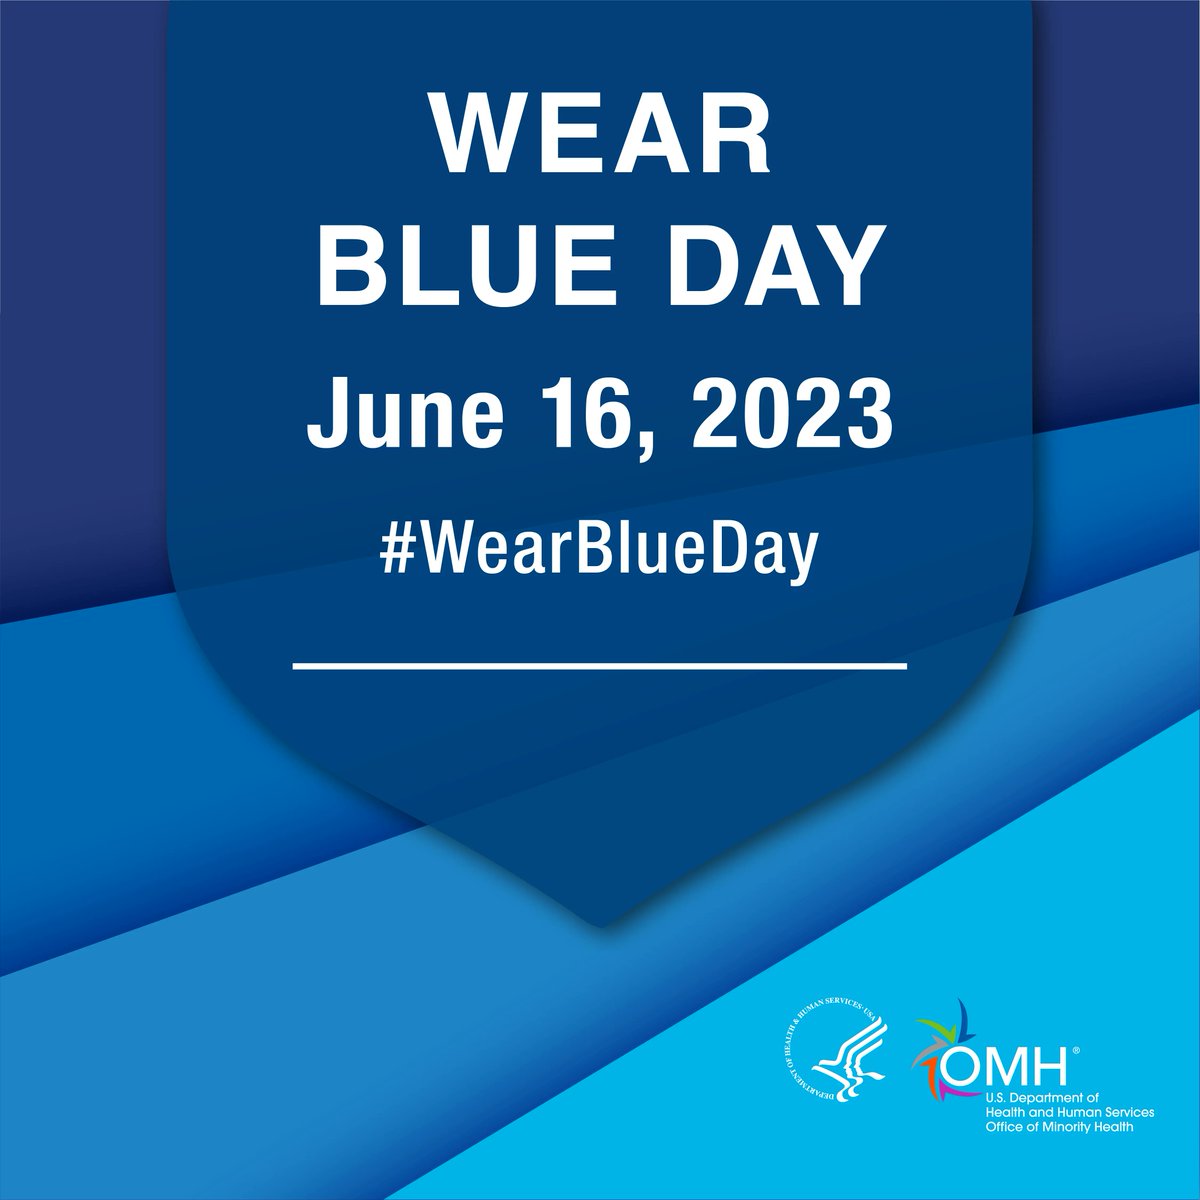 On #WearBlueDay we join @minorityhealth in raising awareness of health disparities experienced by racial and ethnic minority boys/men. Learn how we can improve their health outcomes: buff.ly/3m3hCLT #MHM2023 #MensHealth #BoysHealth #MinorityHealth #HealthEquity